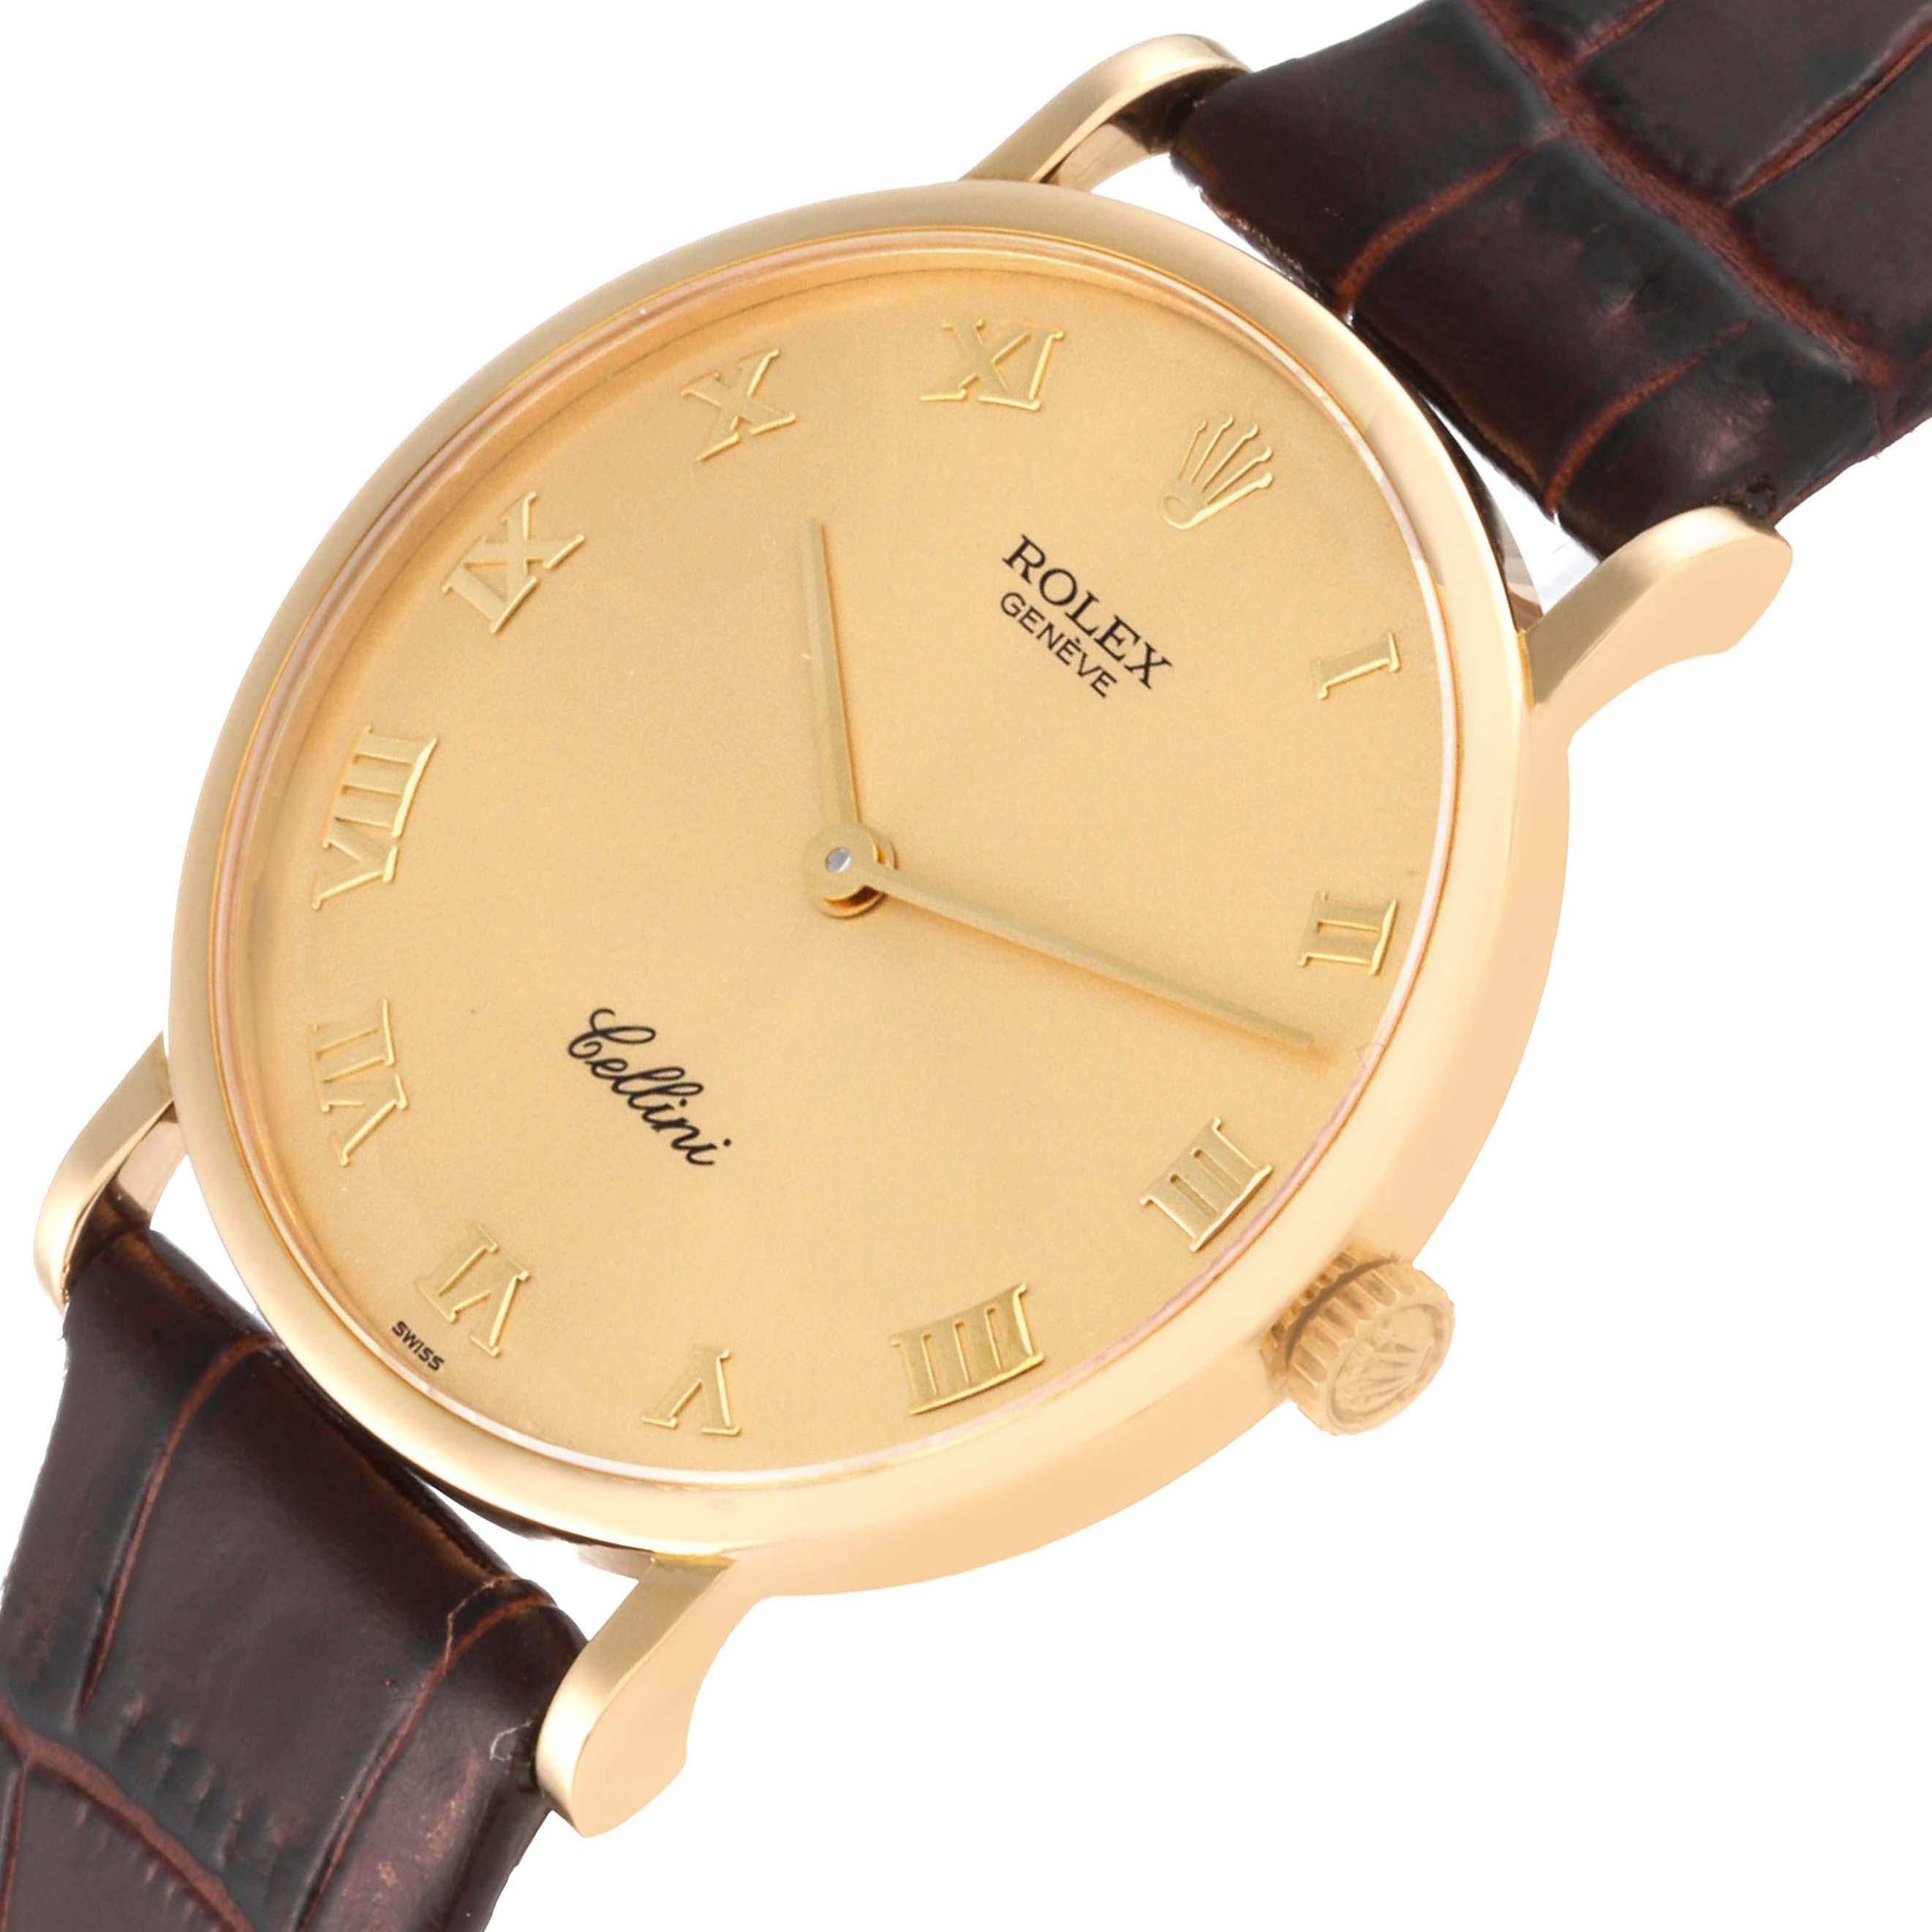 Rolex Cellini Classic Yellow Gold Champagne Dial Brown Strap Mens Watch 5112 1